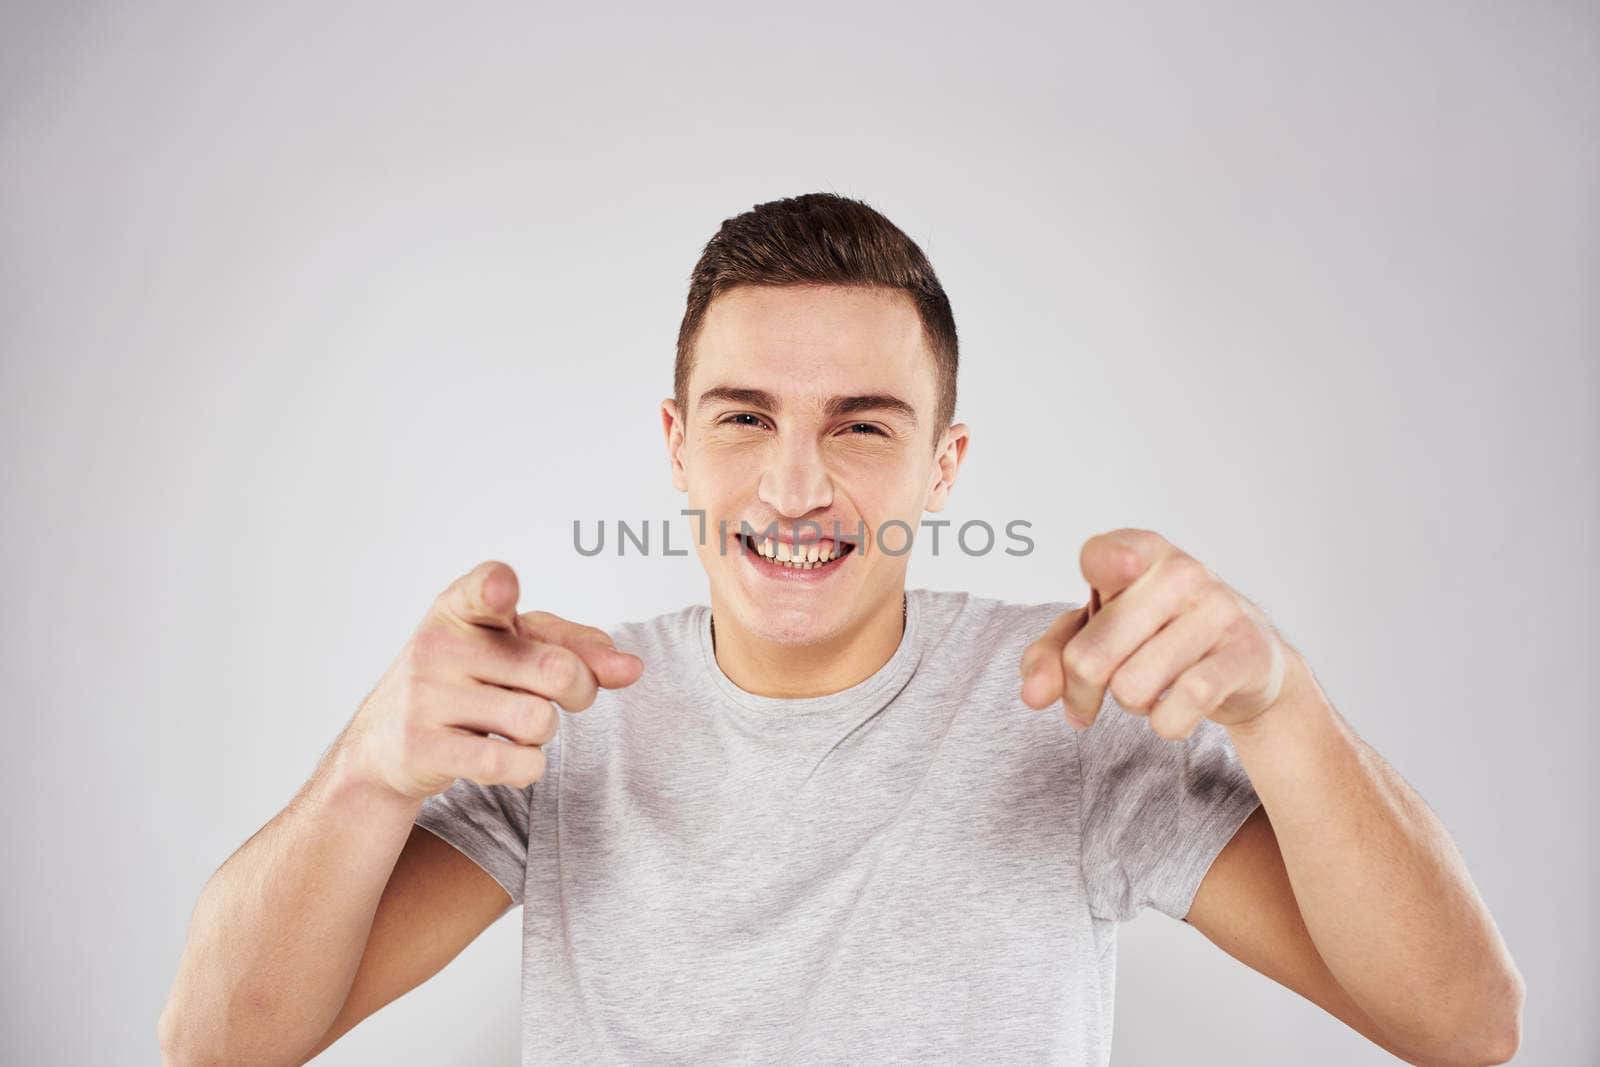 Man in a white t-shirt emotions gestures with hands close-up cropped view light background. High quality photo